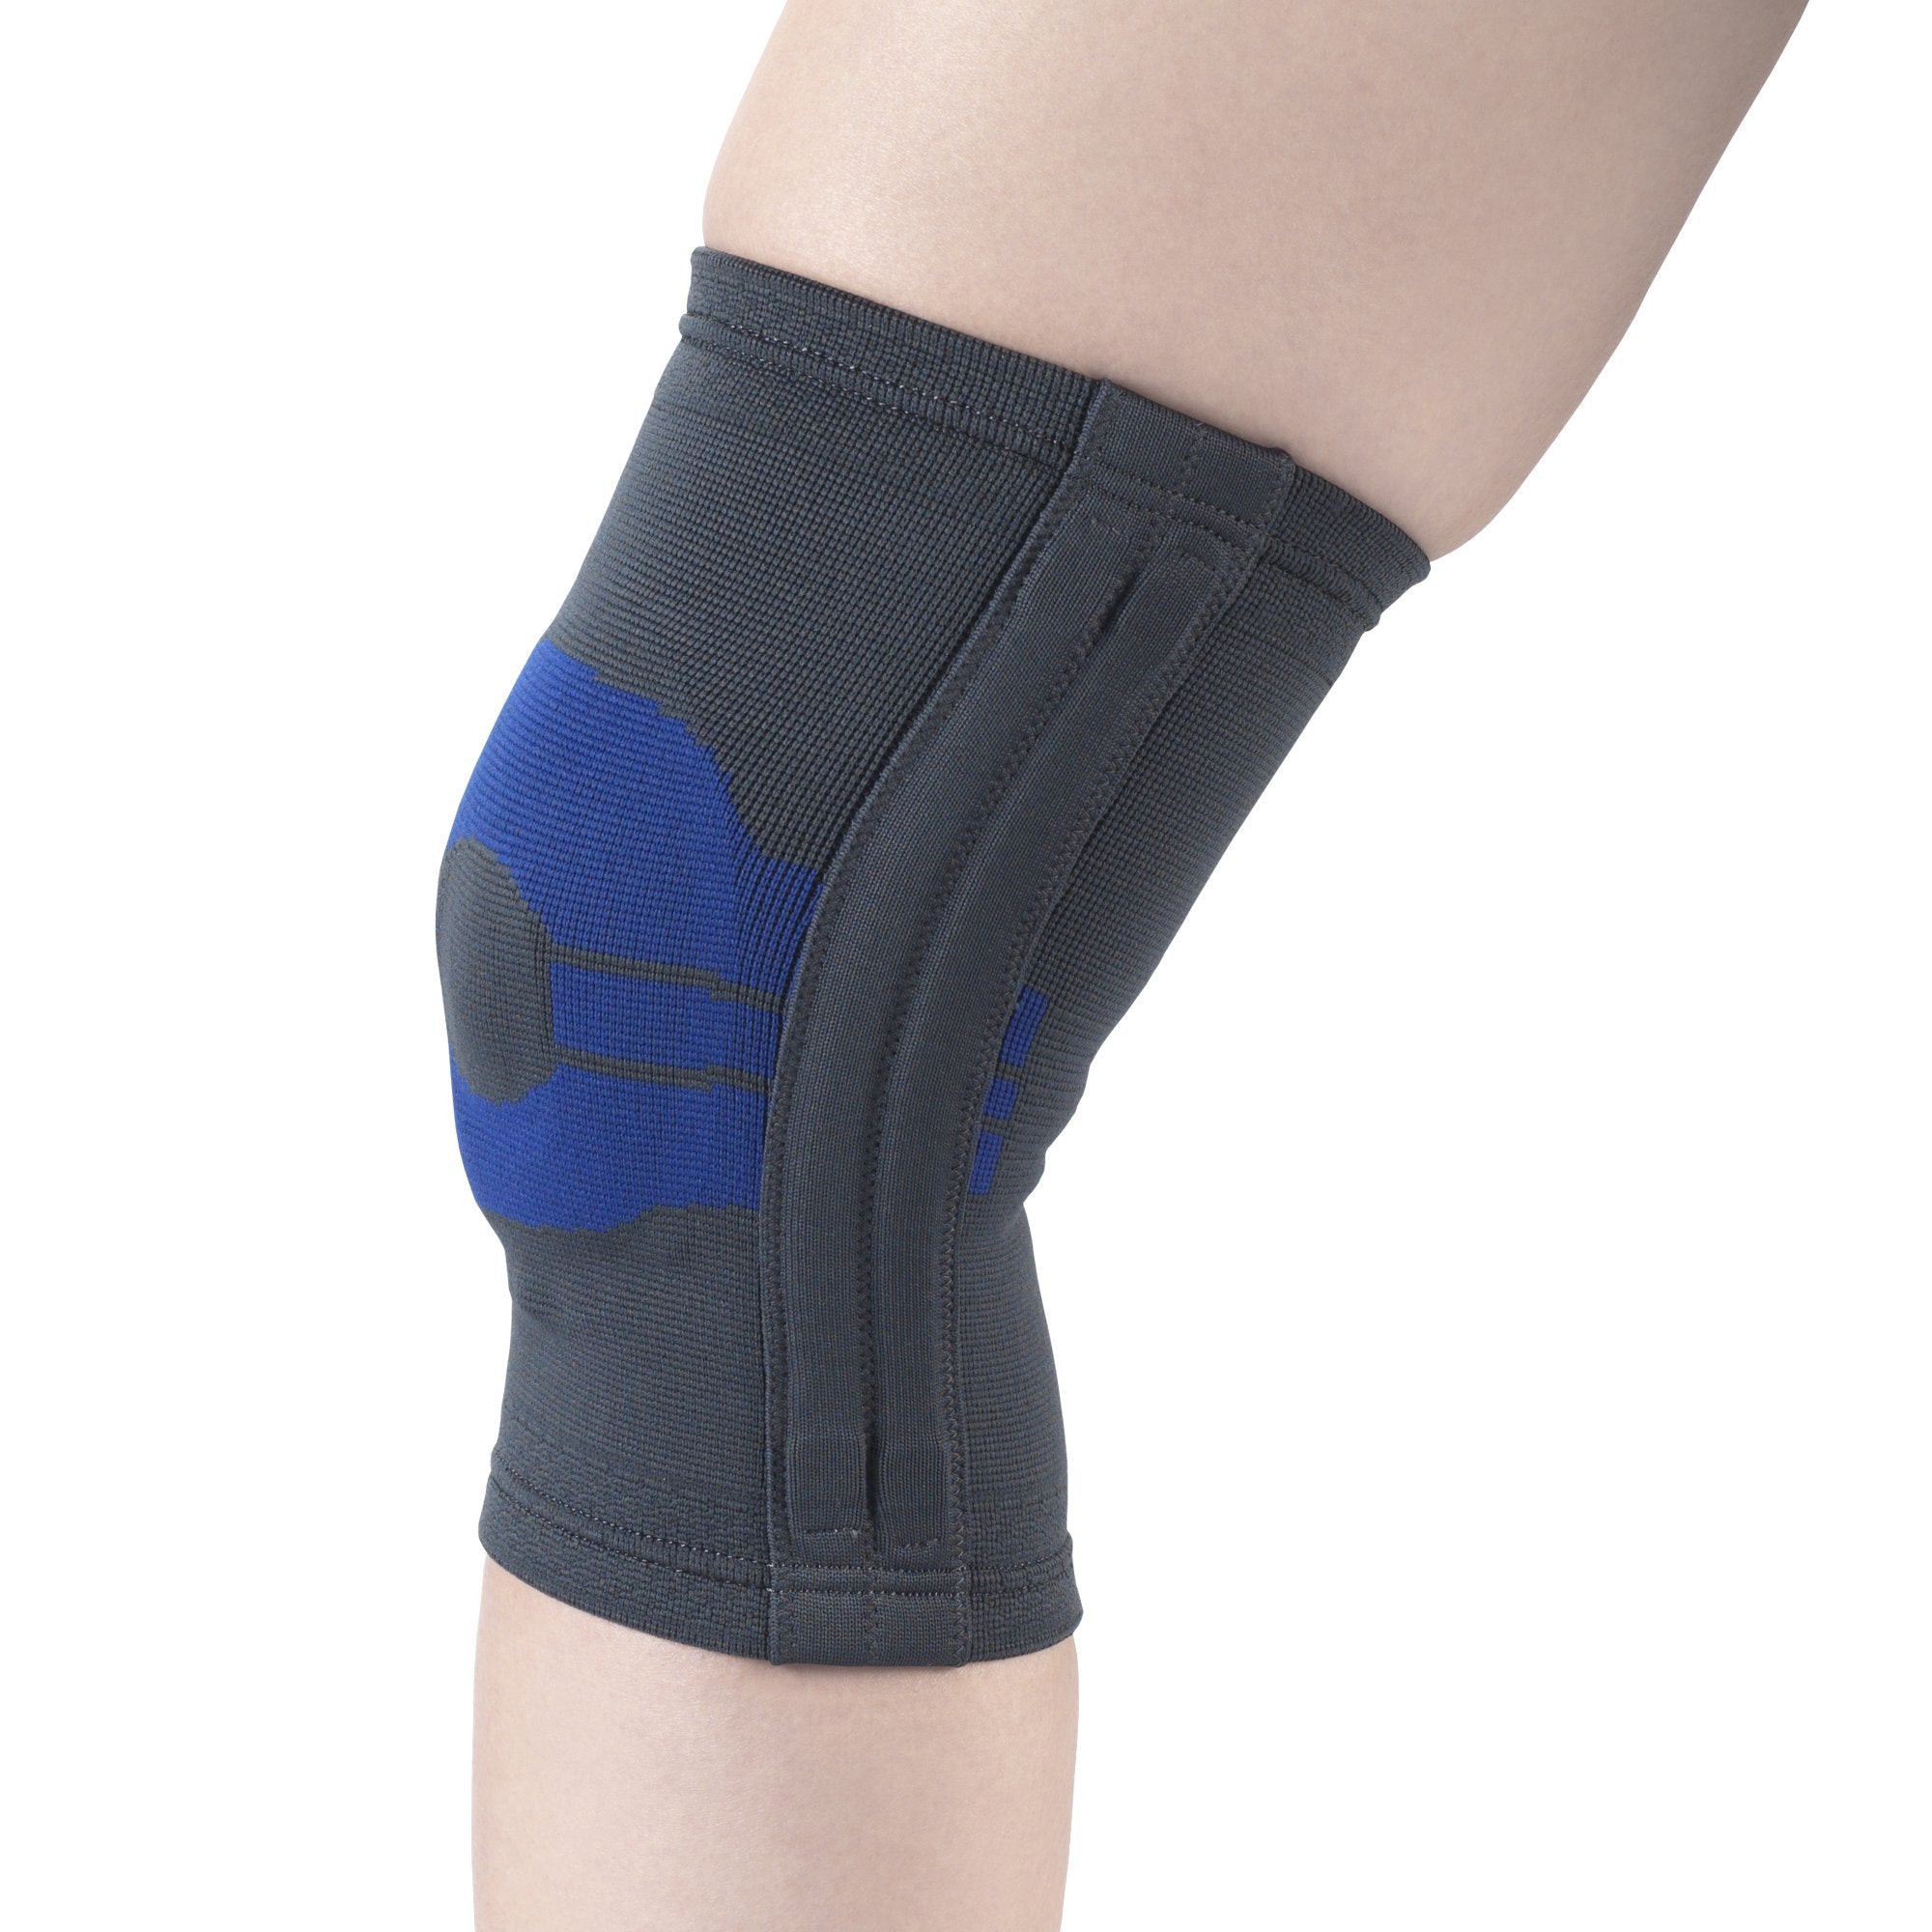 AIR 2435-XL EA/1 ELASTIC KNEE SUPPORT WITH SIDE STAYS CHARCOAL, X-LARGE